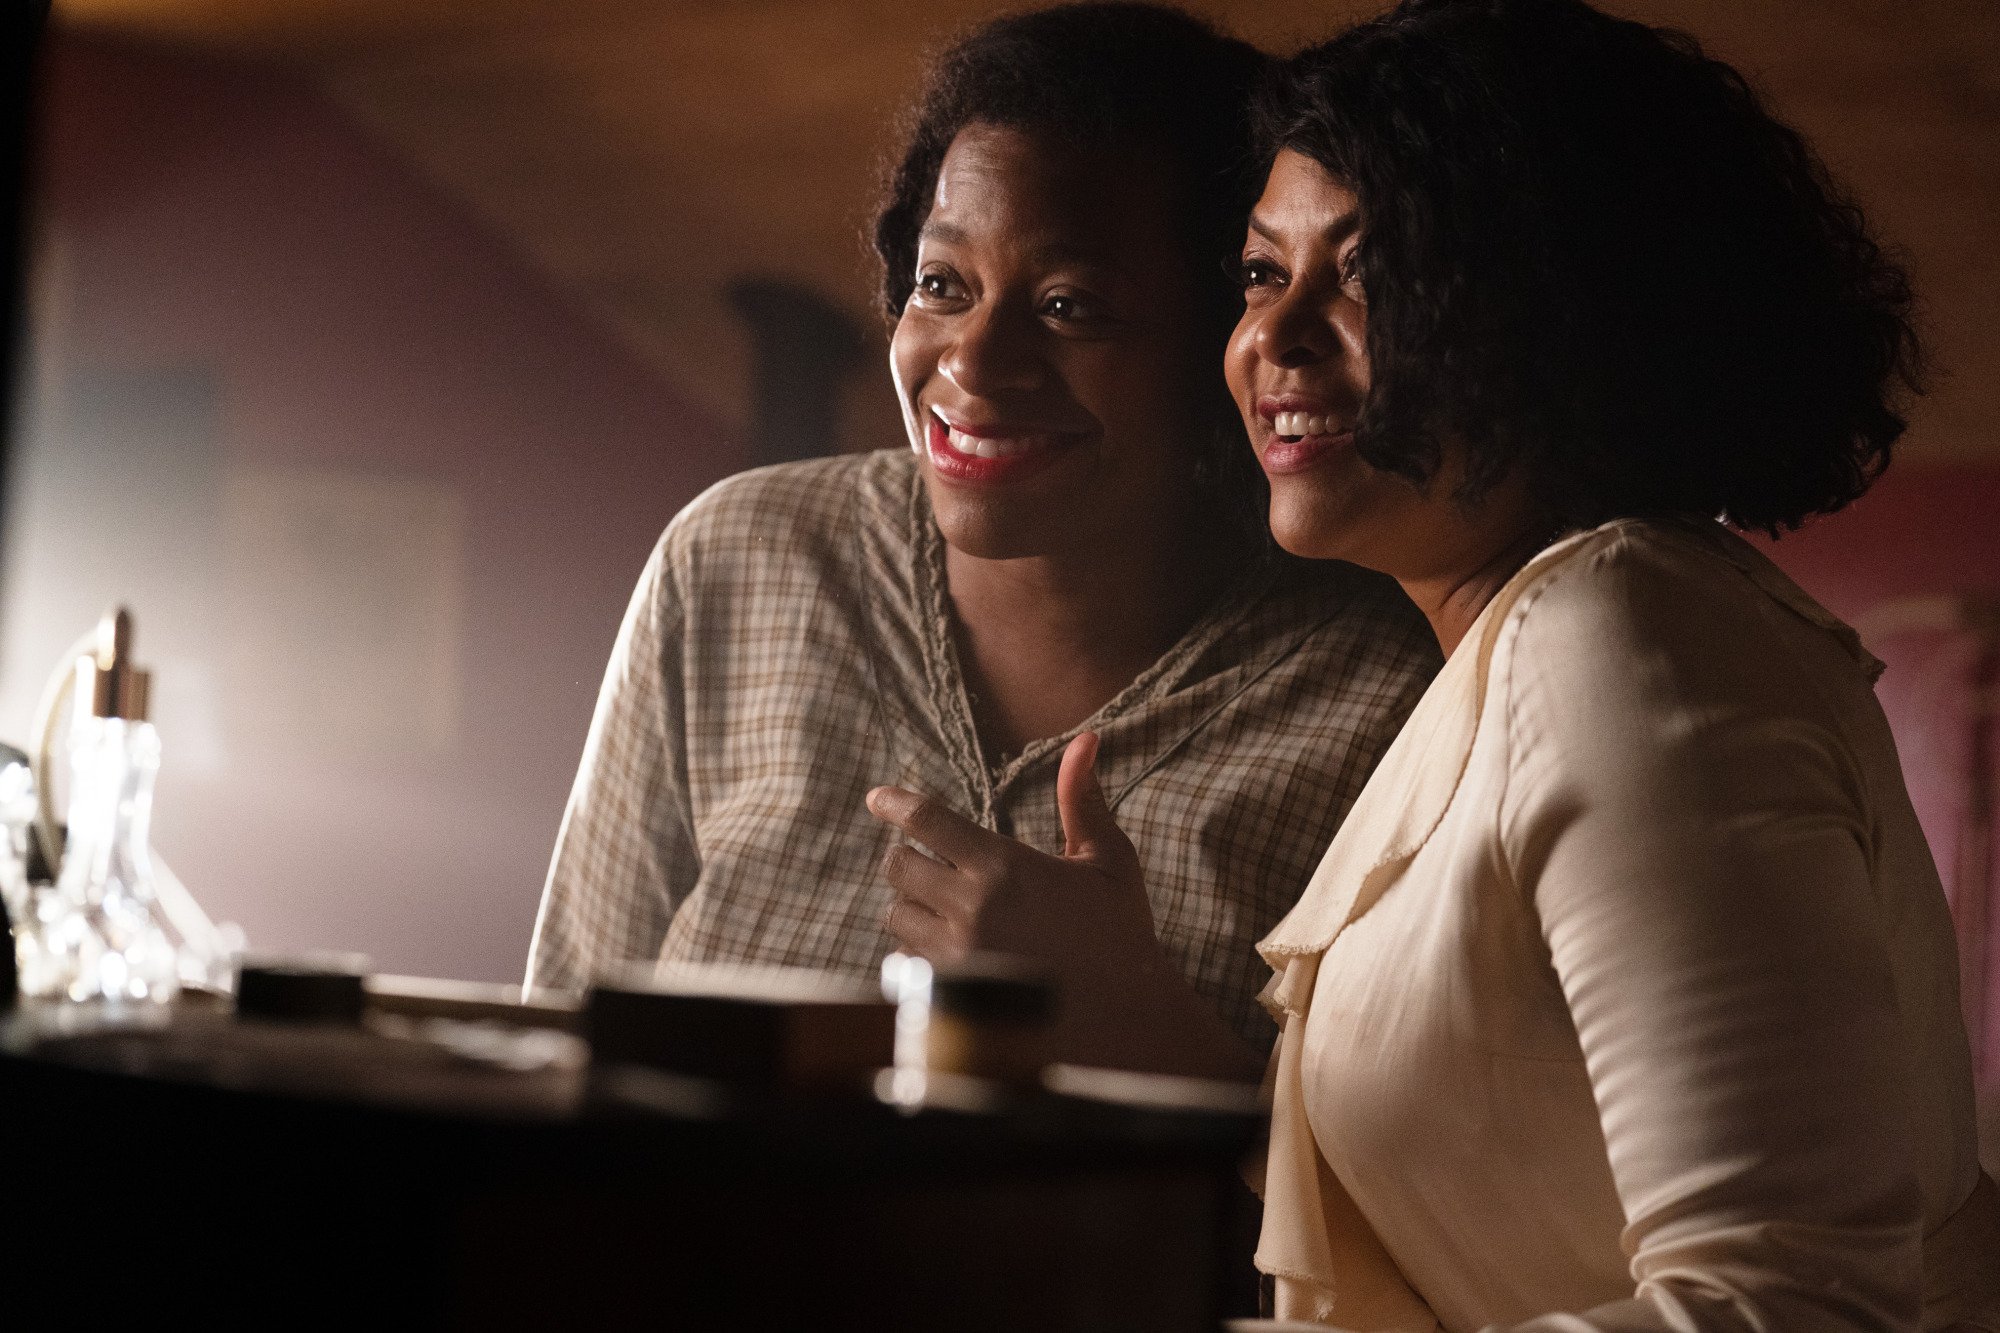 FANTASIA BARRINO as Celie and TARAJI P. HENSON as Shug Avery in Warner Bros. Pictures’ bold new take on a classic, “THE COLOR PURPLE,” a Warner Bros. Pictures release.